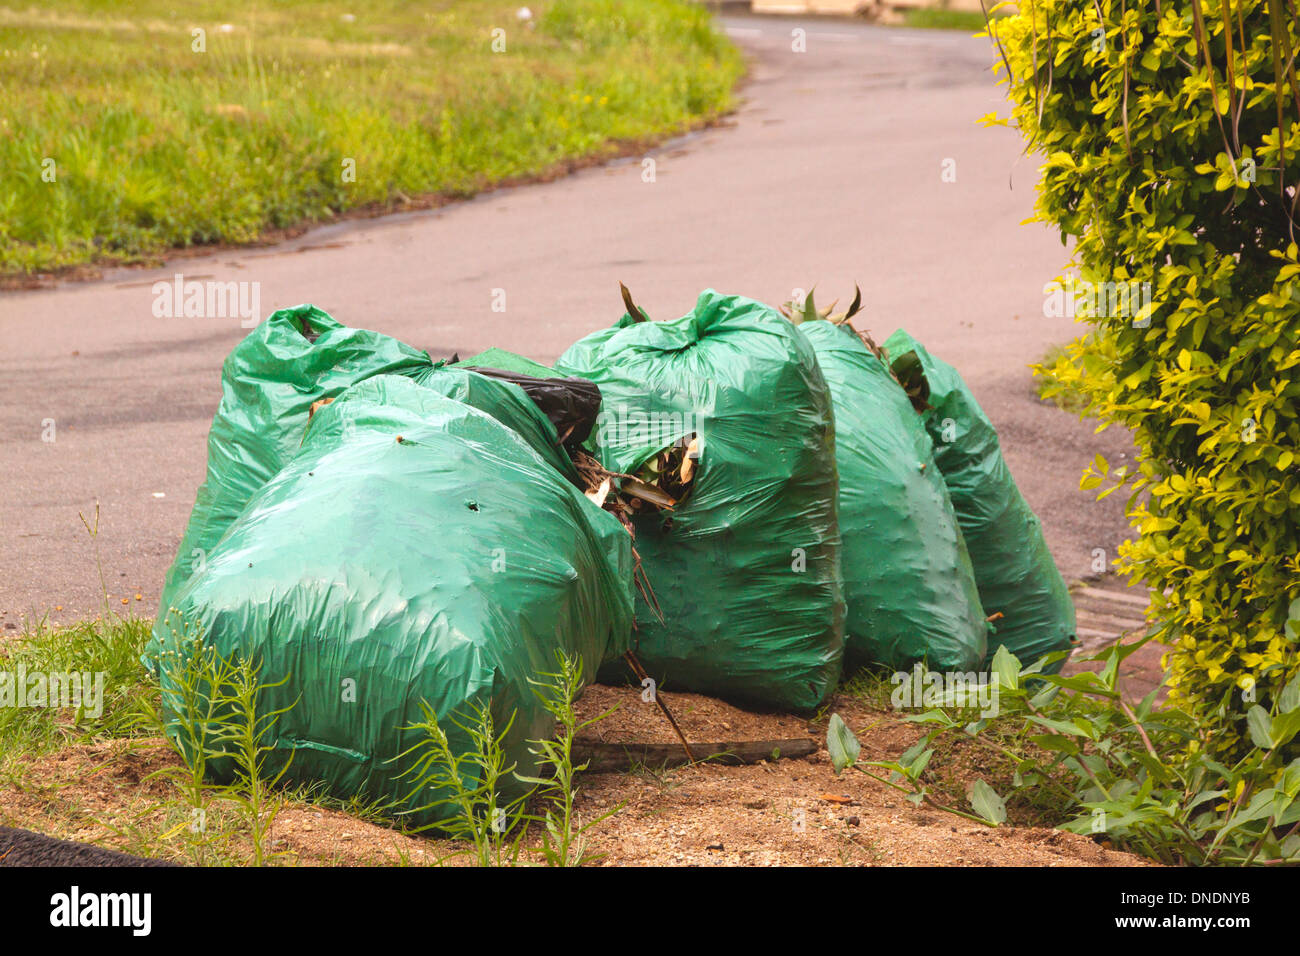 Green garbage bags waiting for collection on side of road Stock Photo